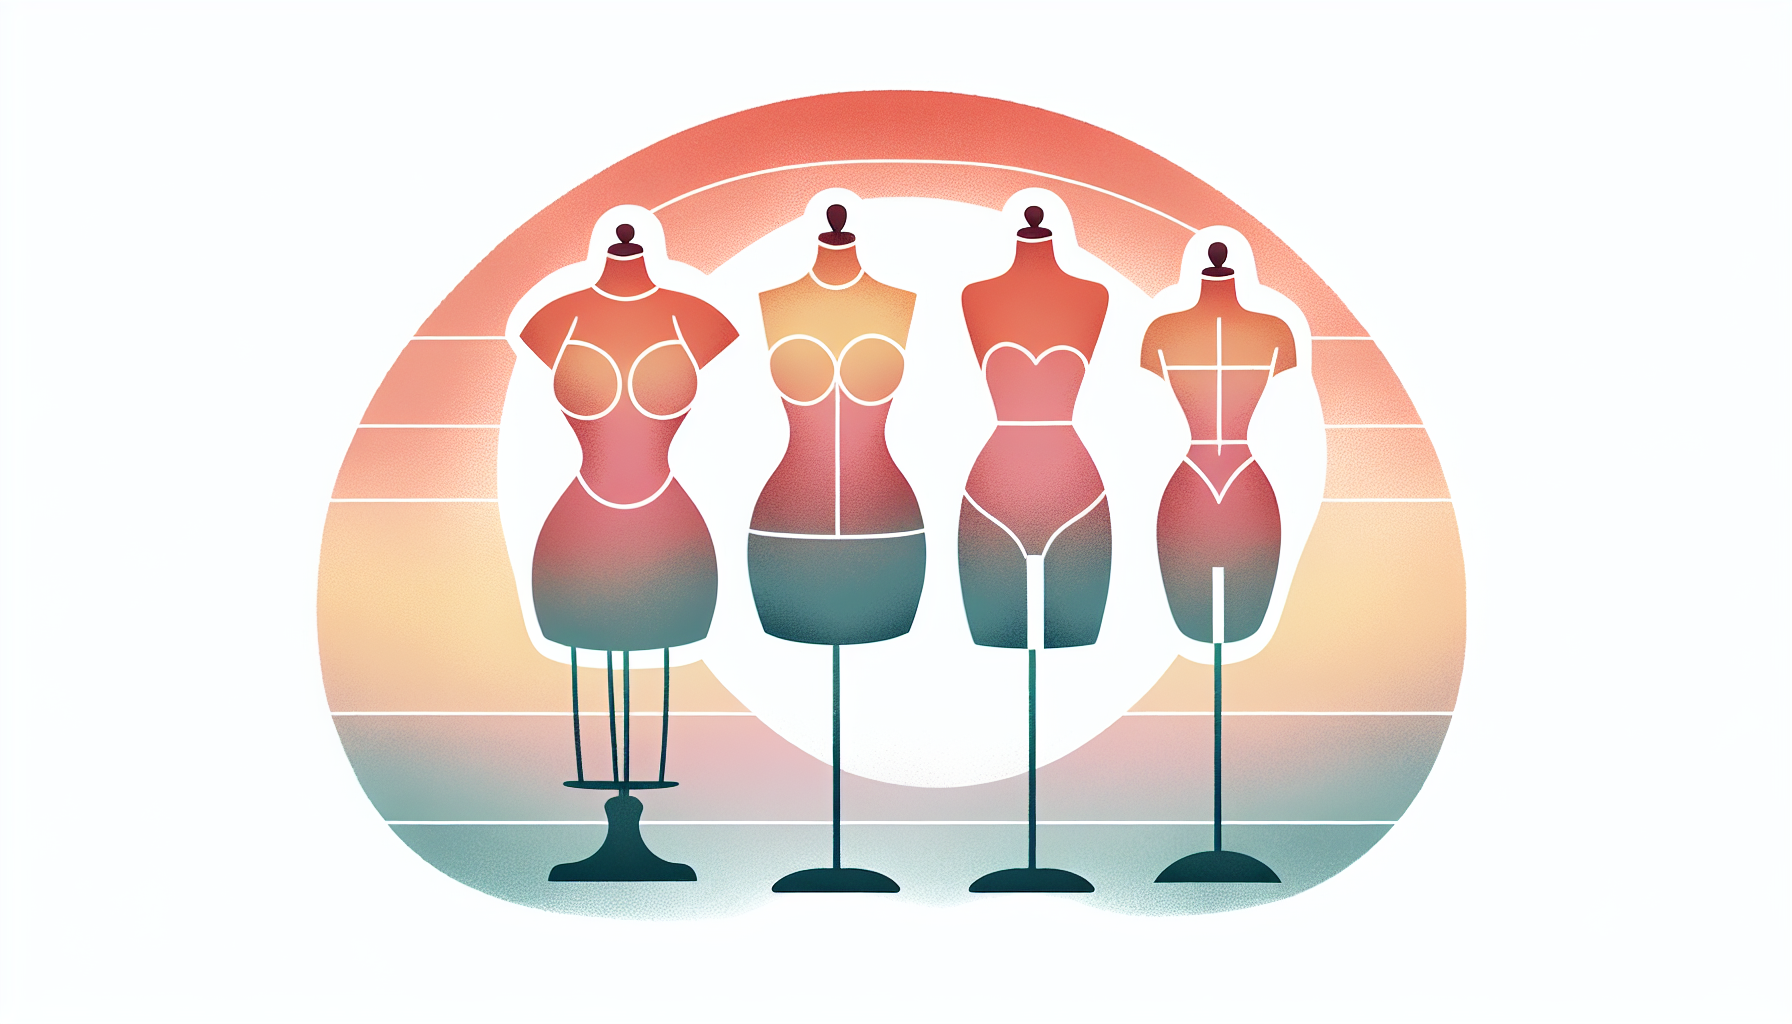 Illustration of different body shapes